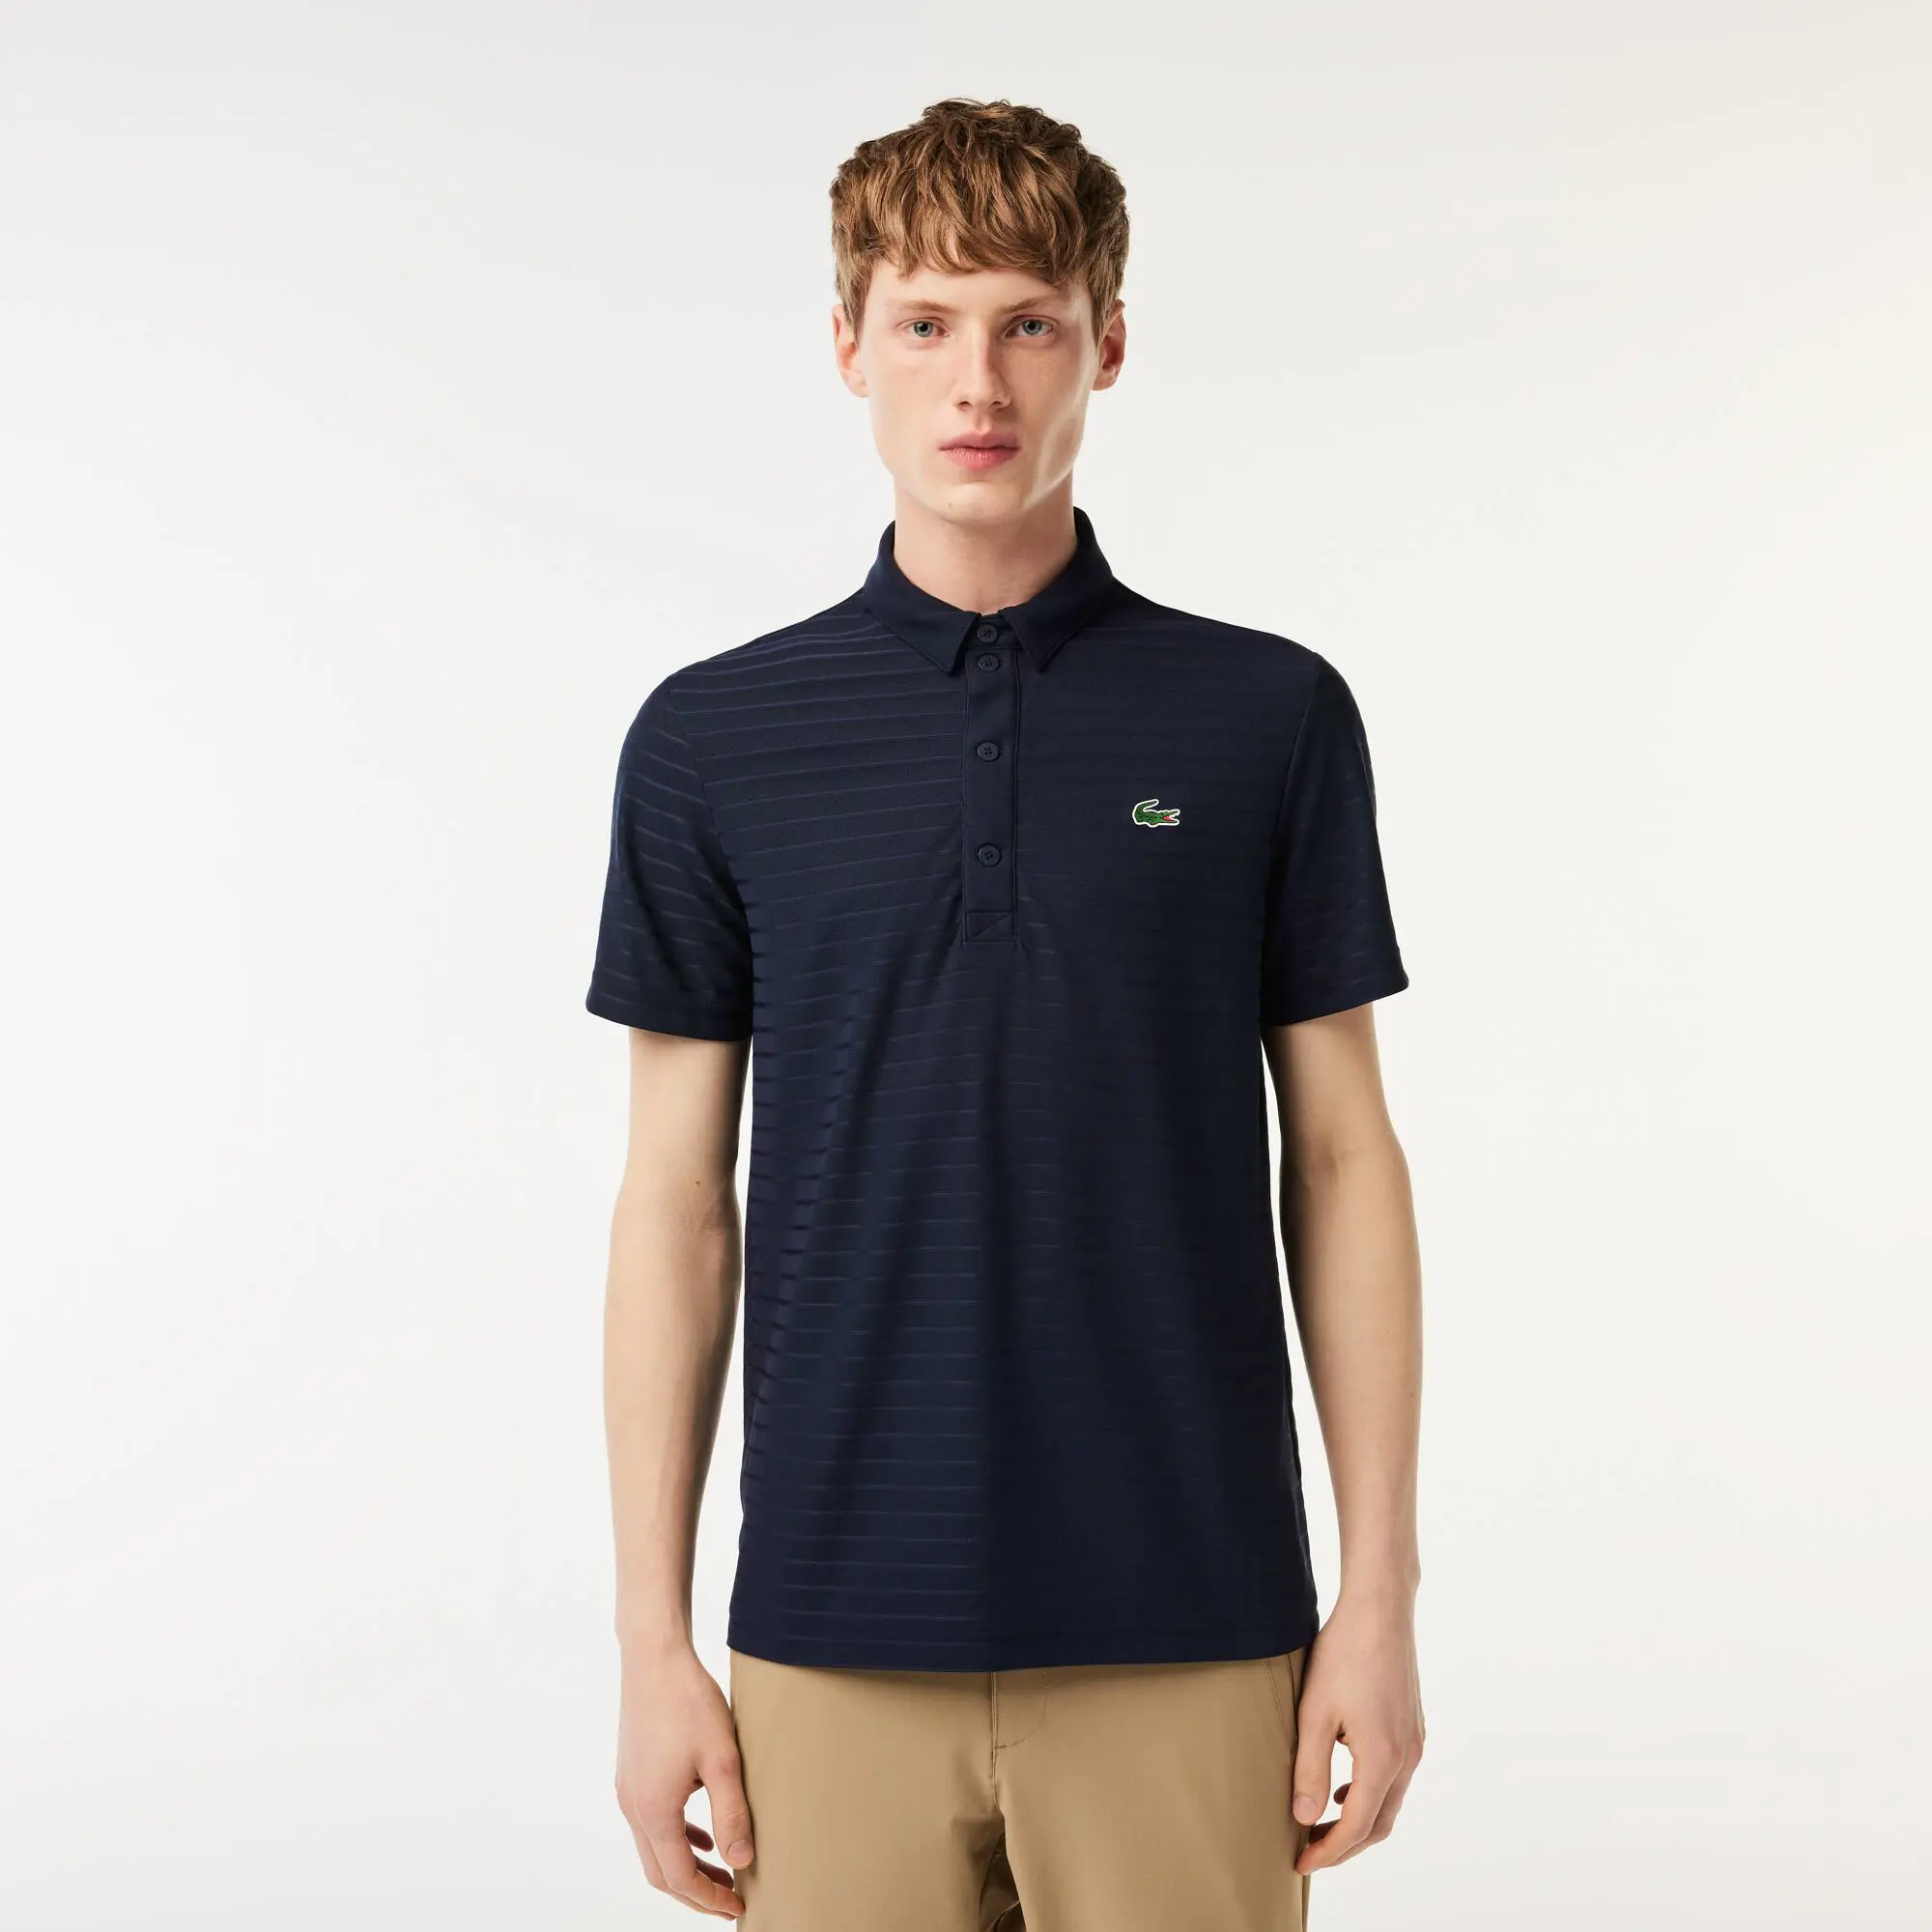 Lacoste Men's SPORT Textured Breathable Golf Polo. 1